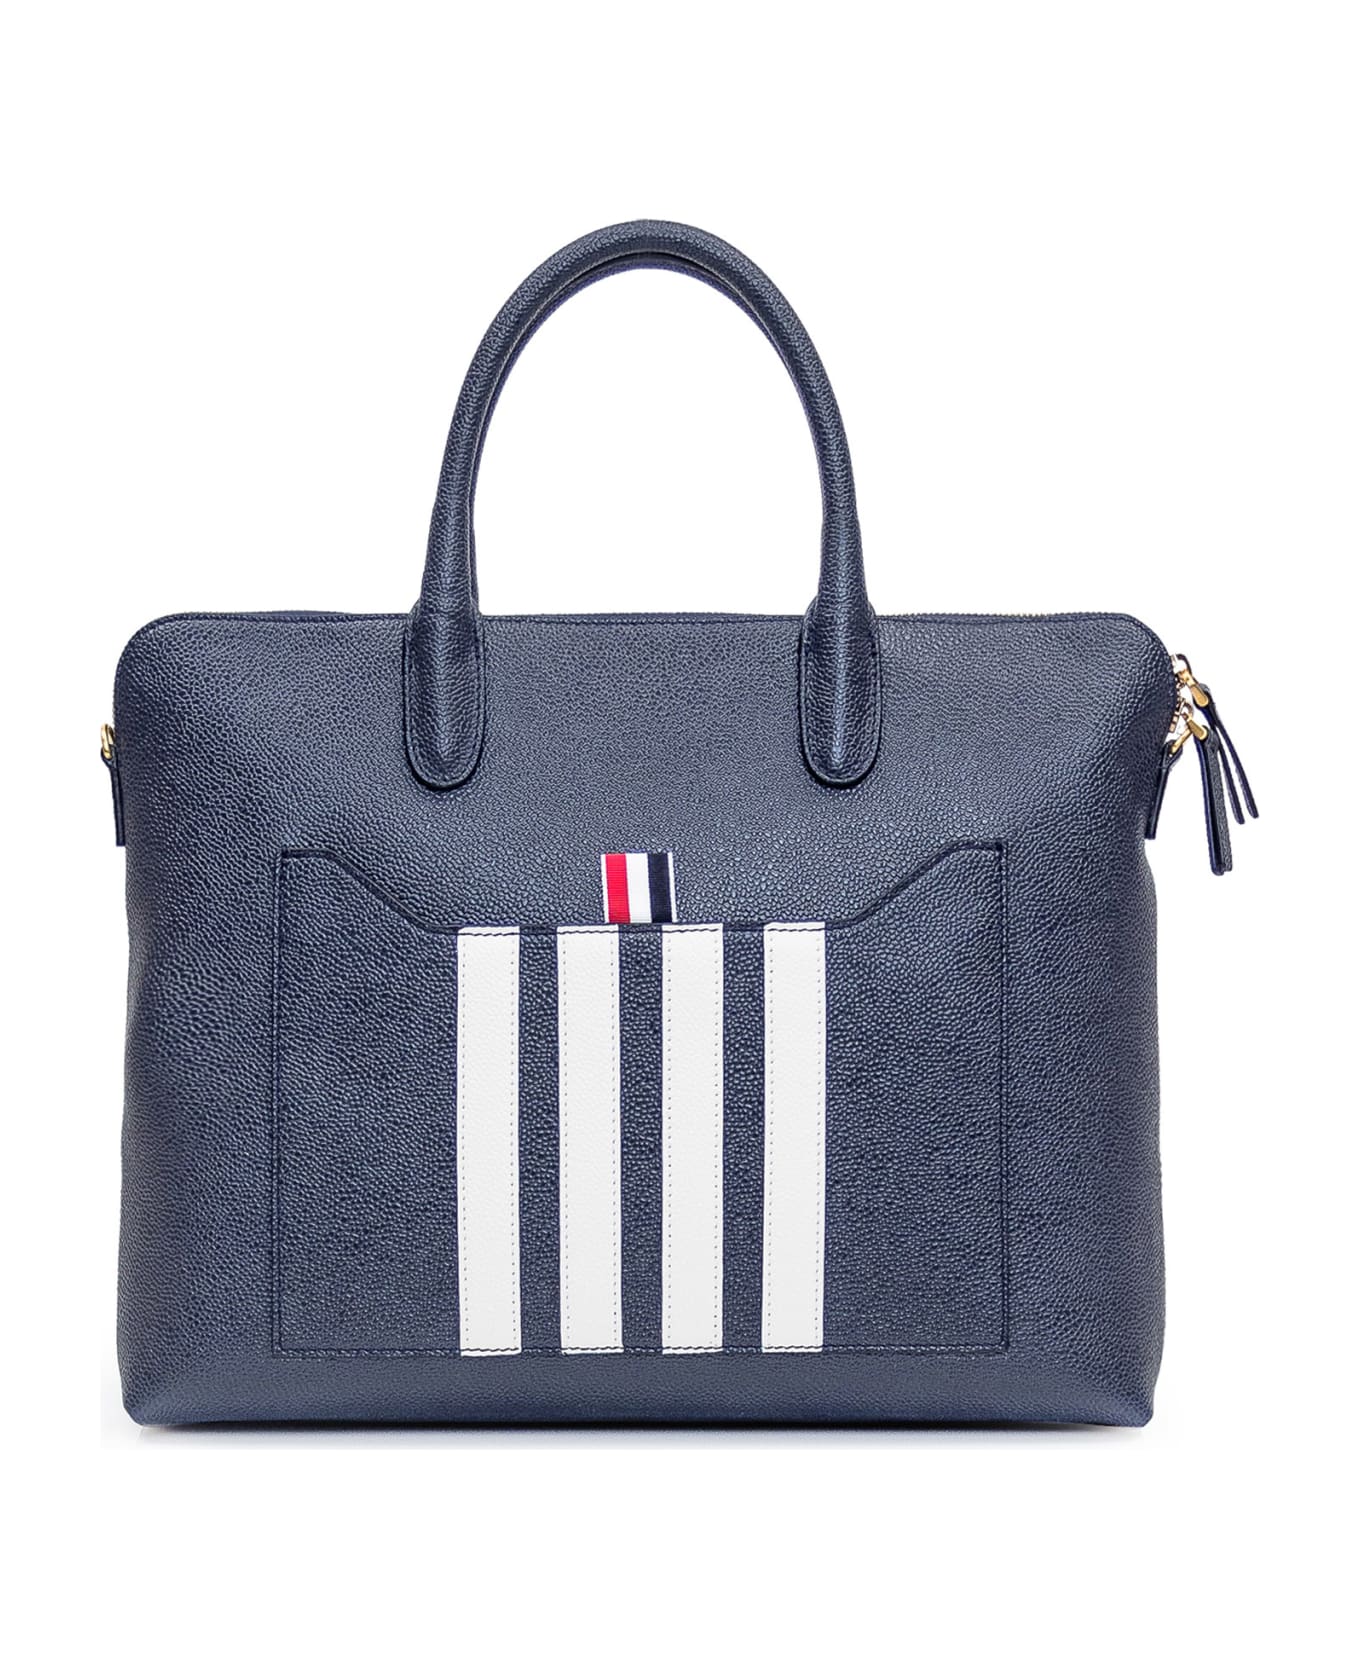 Thom Browne Bag With Logo - NAVY